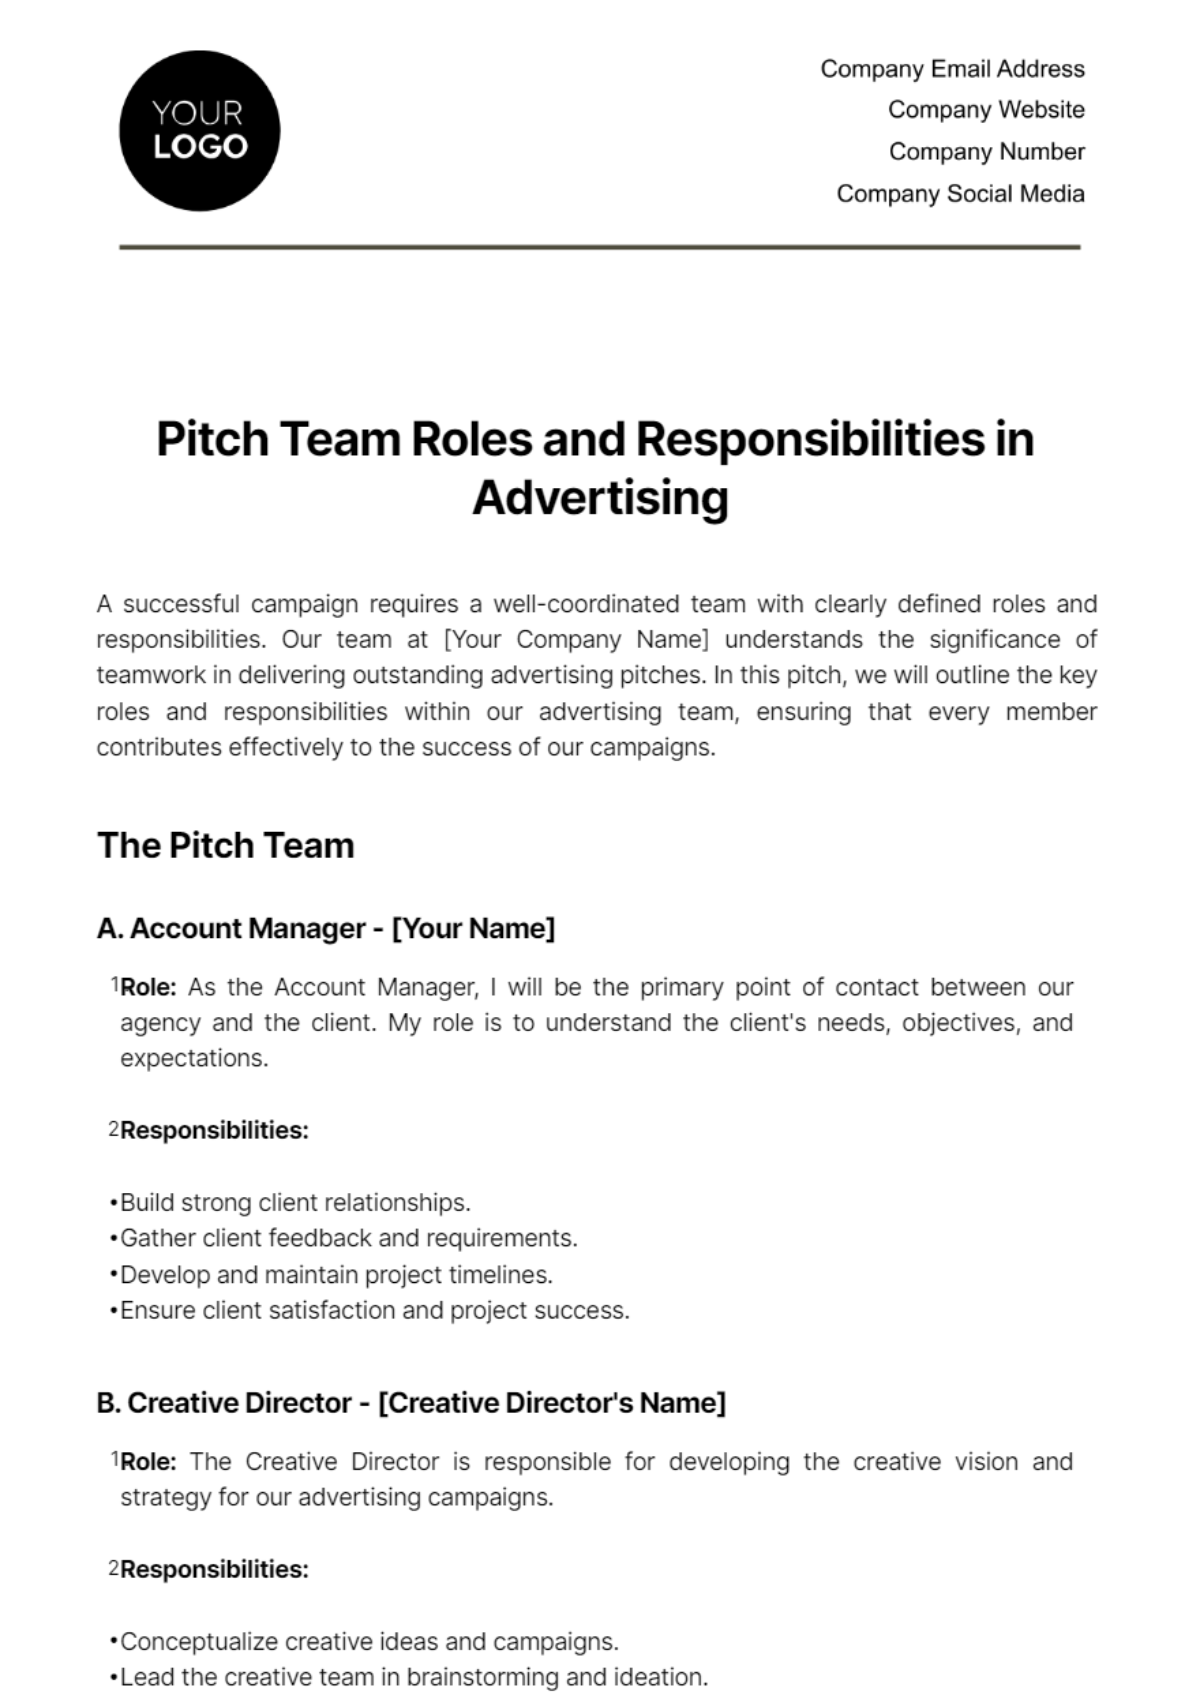 Pitch Team Roles and Responsibilities in Advertising Template